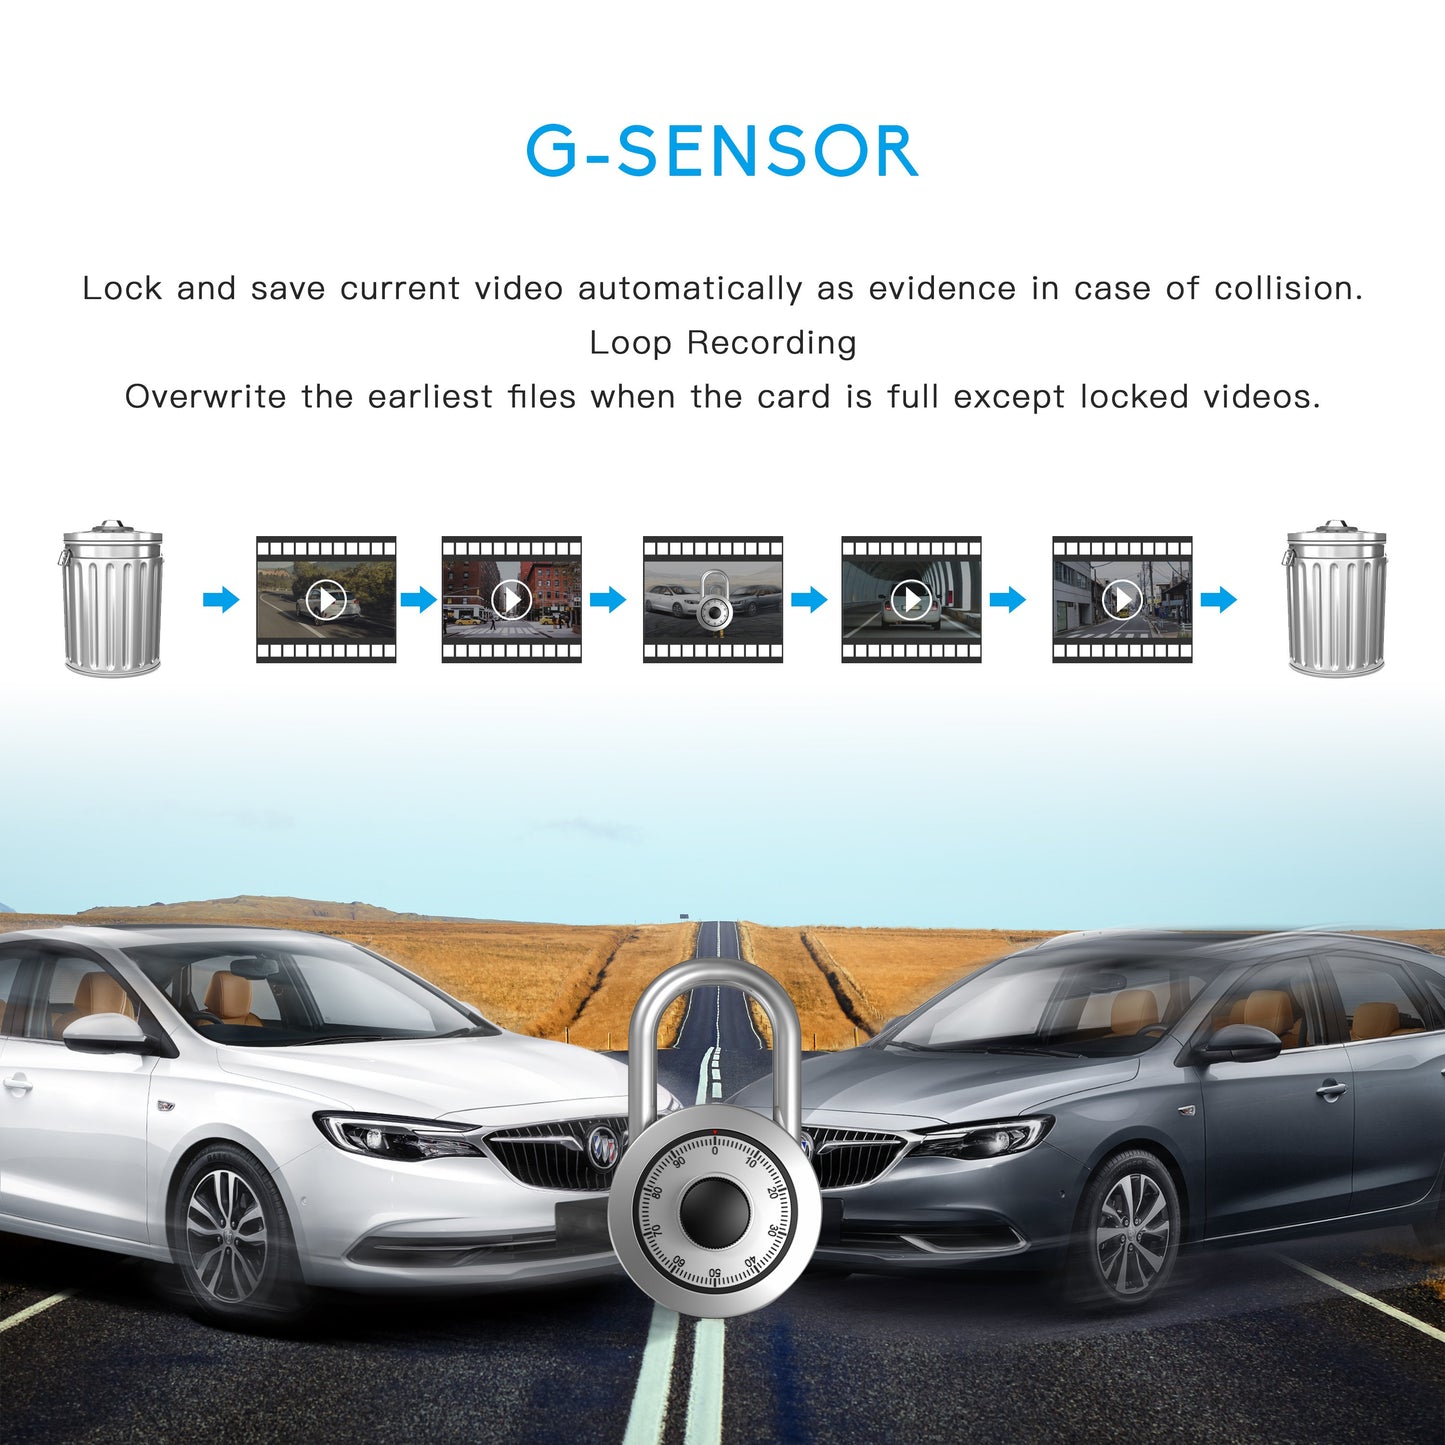 Toguard CE13 Dual Lens Dash Camera Touch Screen Front for Cars Backup Camera